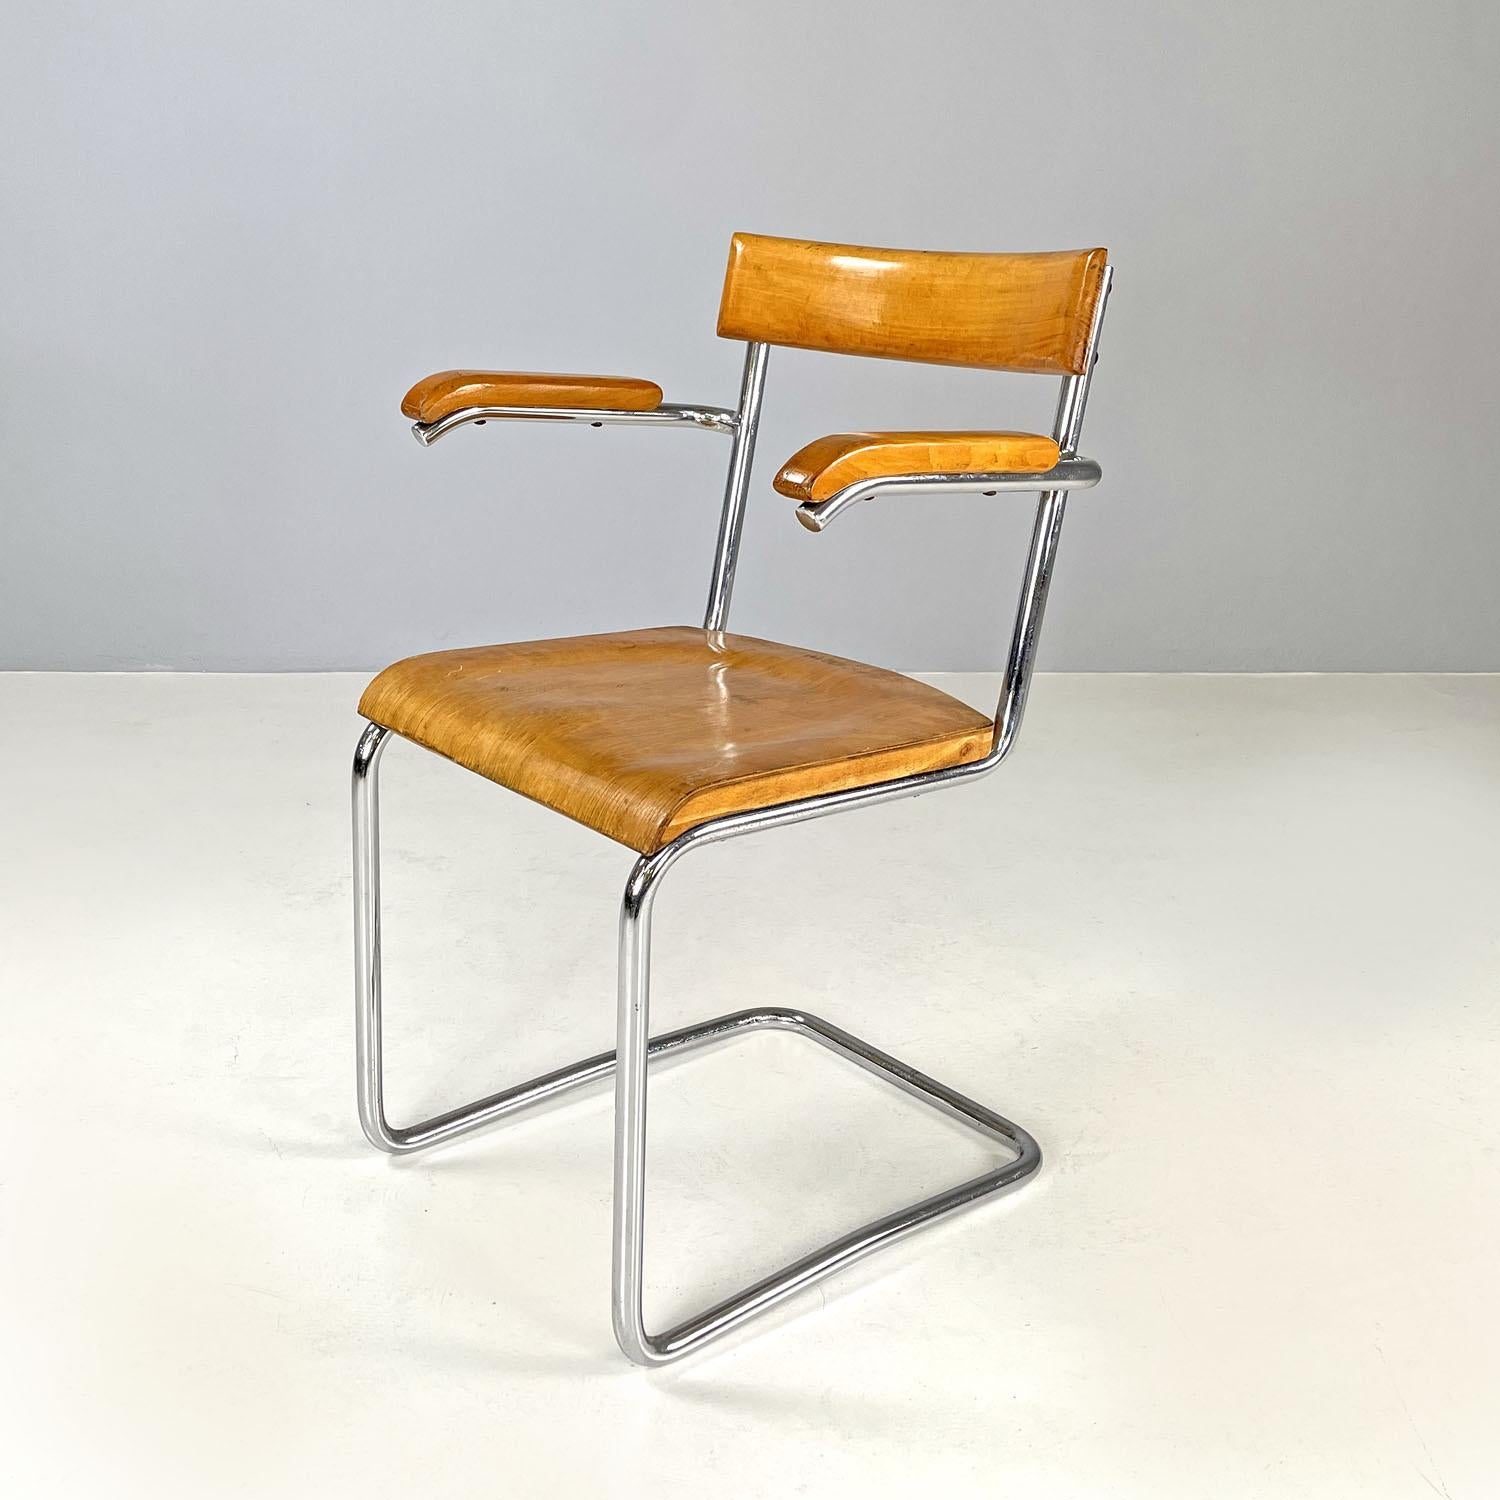 Czech Art Deco wood and chromed steel chair with armrests by Ladislav Zak, 1930s
Chair with armrests and rectangular seat. The structure is in chromed tubular steel, while the seat, backrest and armrests are in wood with curved lines.
Designed by